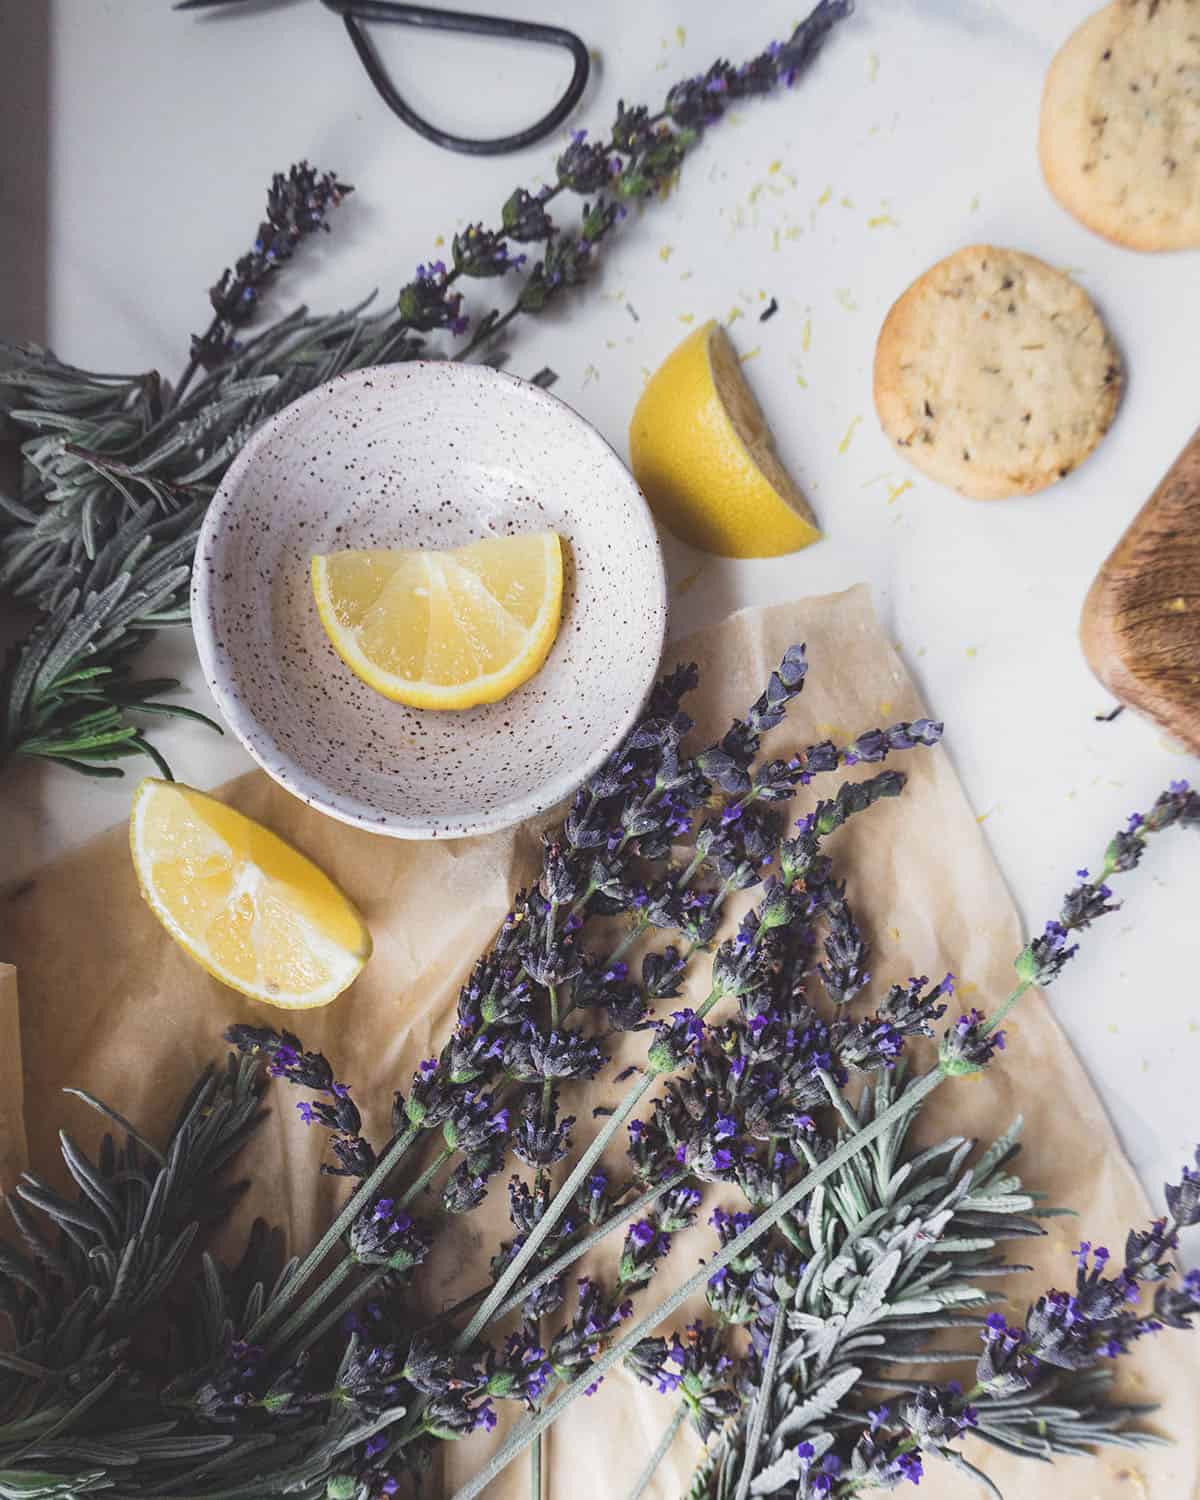 A bowl with a slice of lemon in it, surrounded by other lemon slices and fresh lavender.